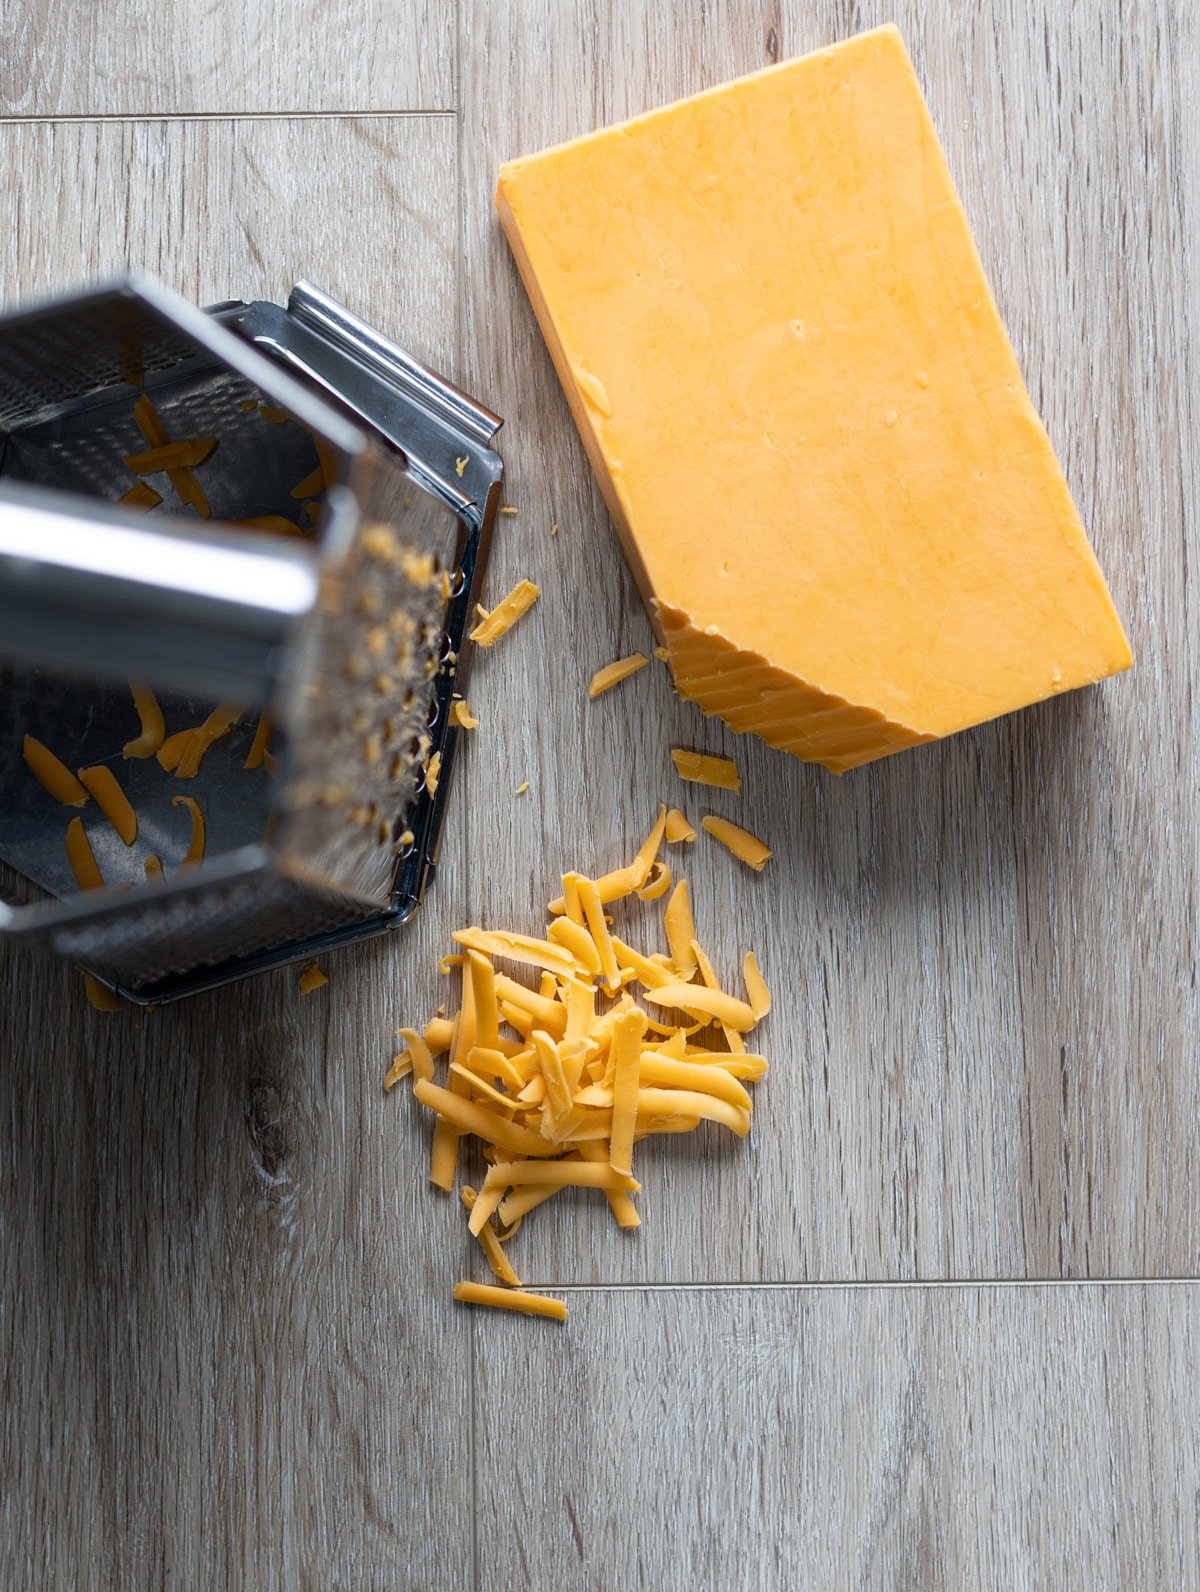 Shredded cheese on counter next to a cheese block and grater. 